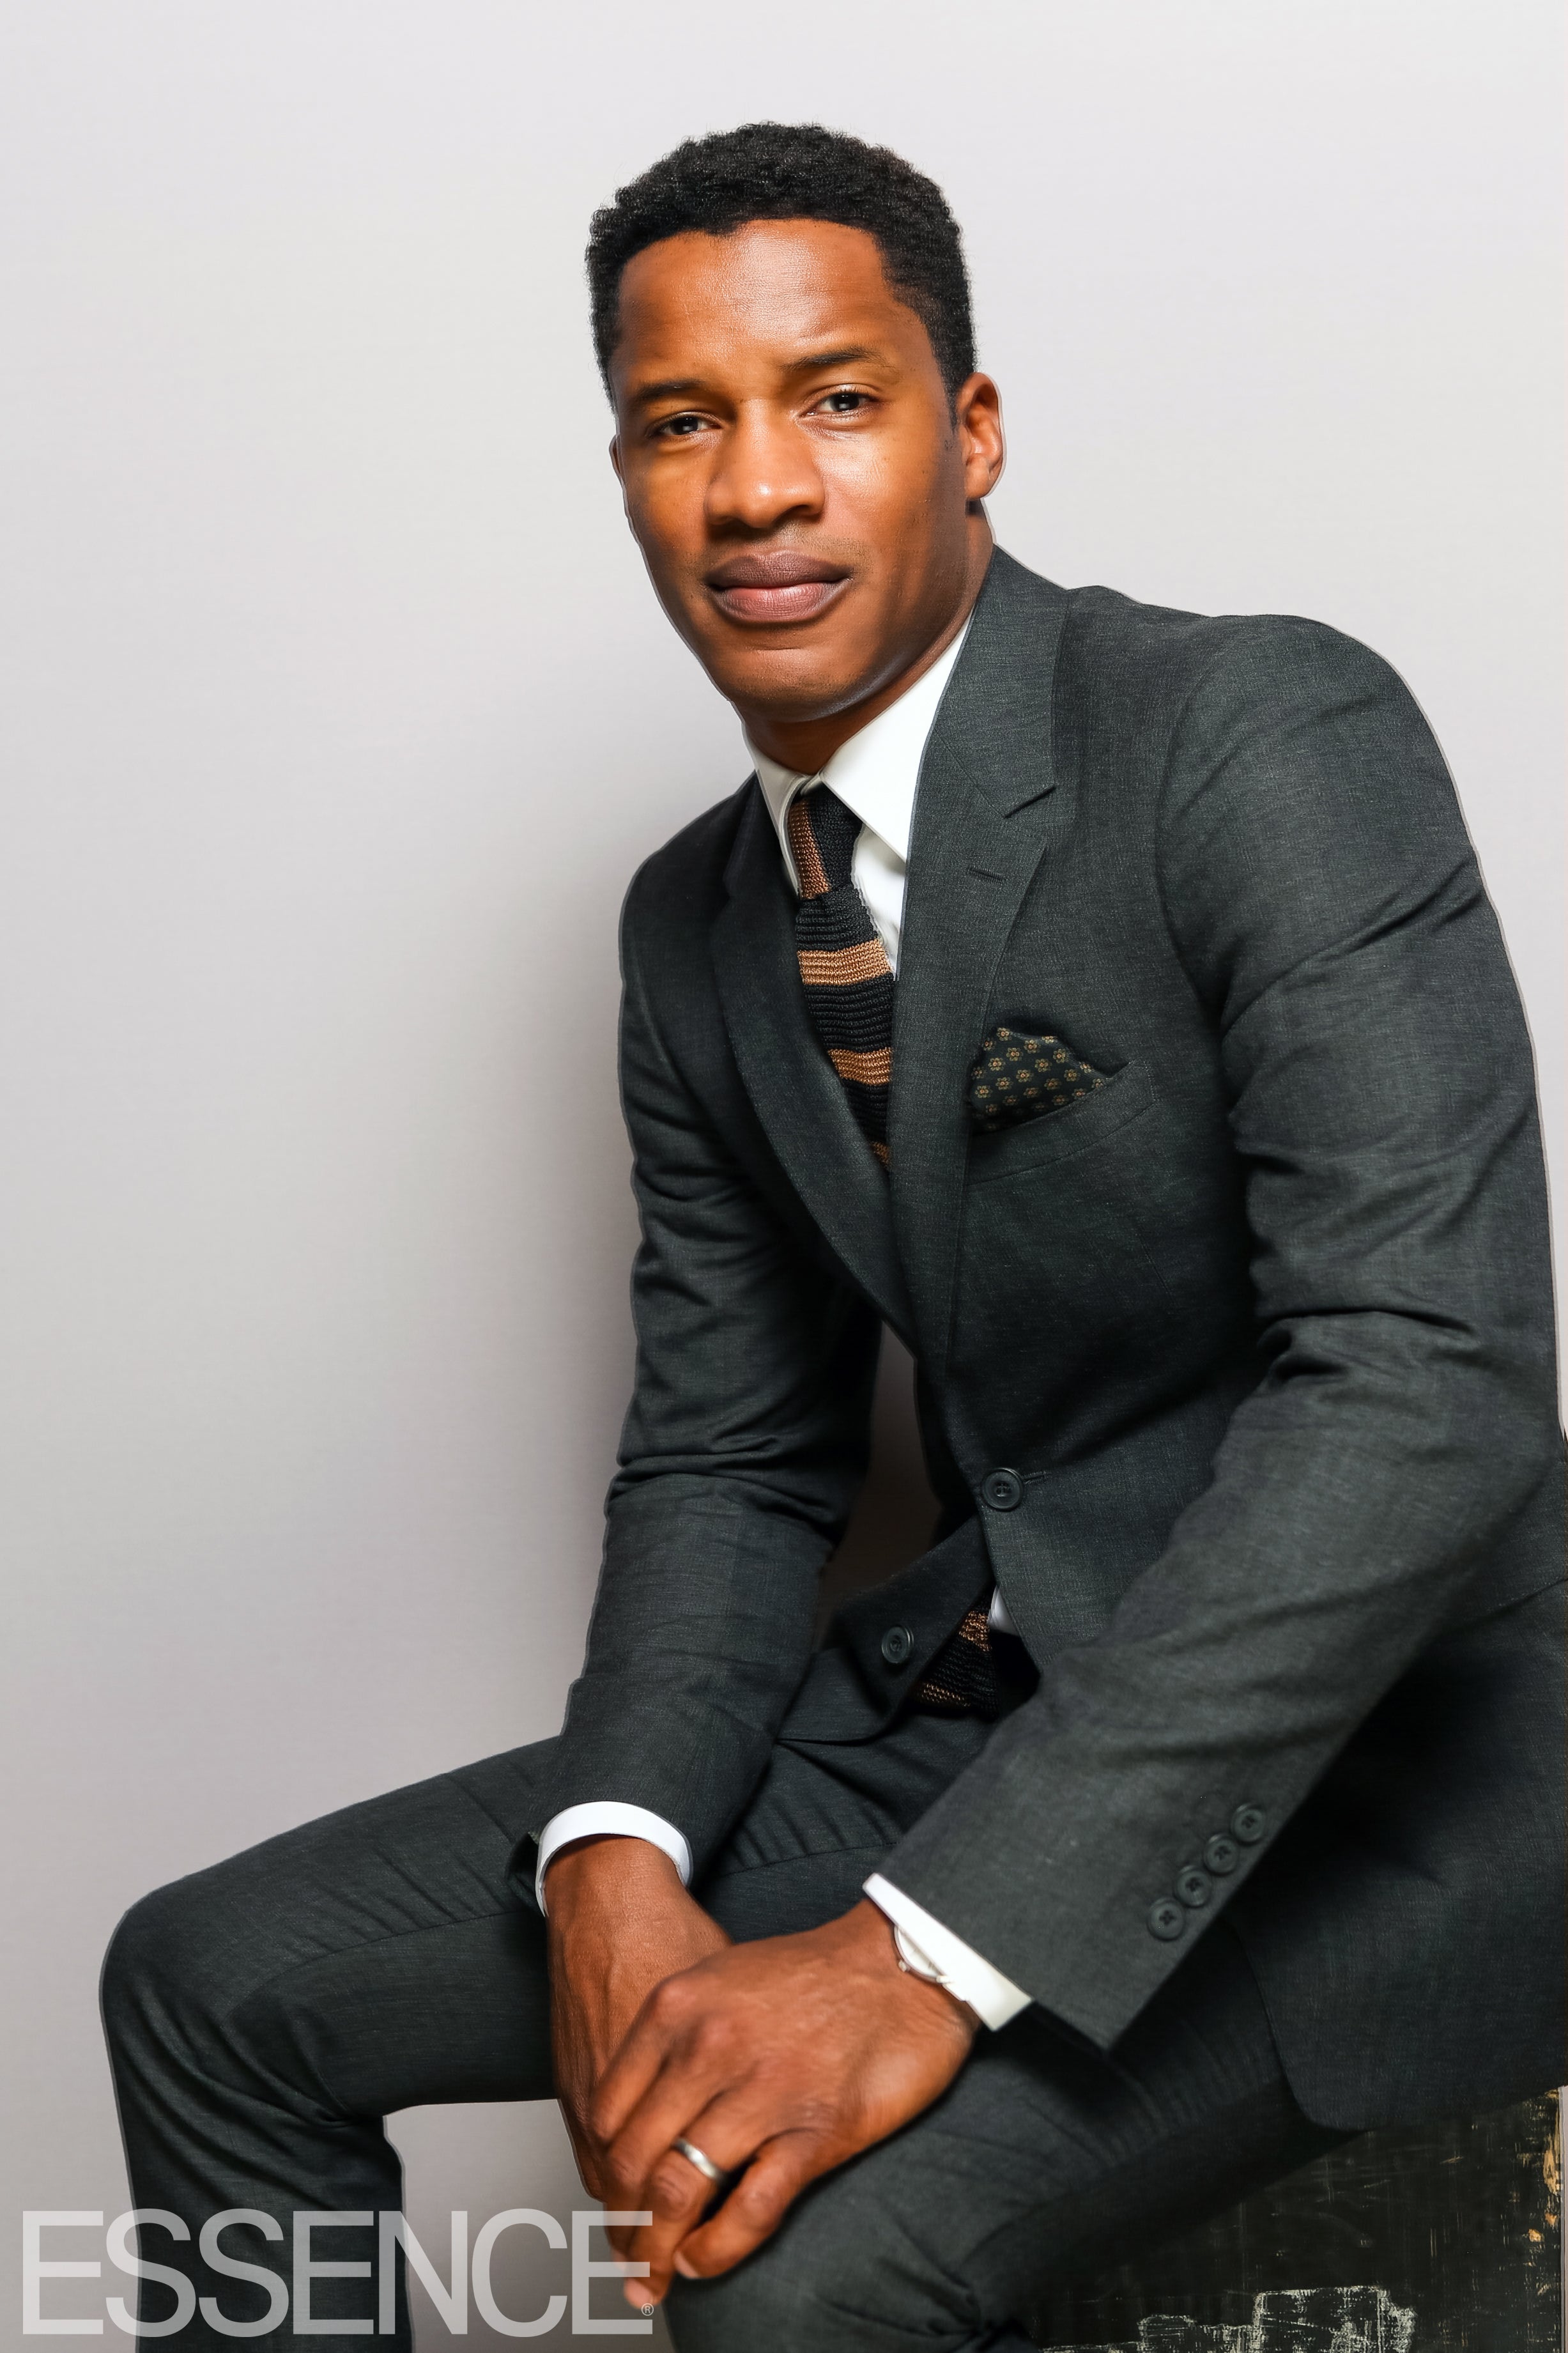 Nate Parker Is Launching a Film School at Wiley College to Cultivate New Voices